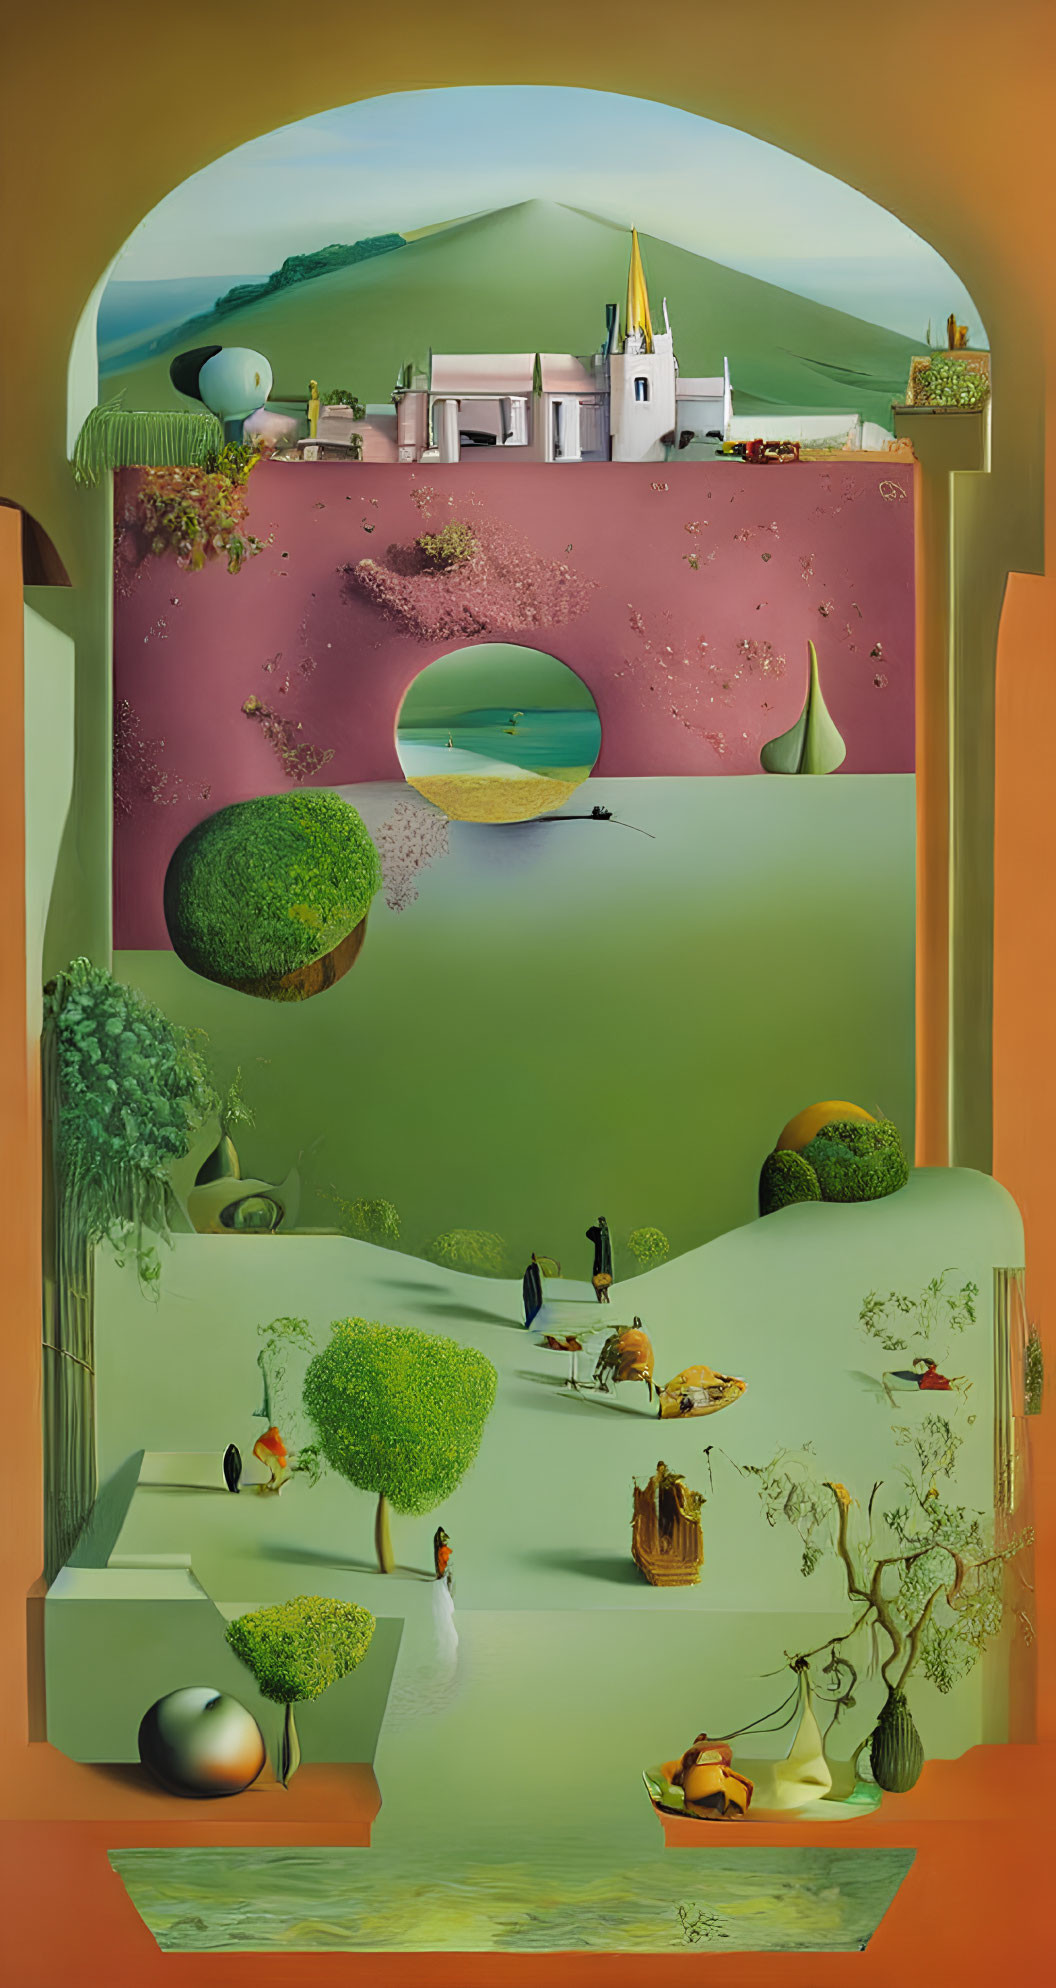 Layered surrealistic landscape with greenery, ponds, ducks, peacock, floating orbs, and